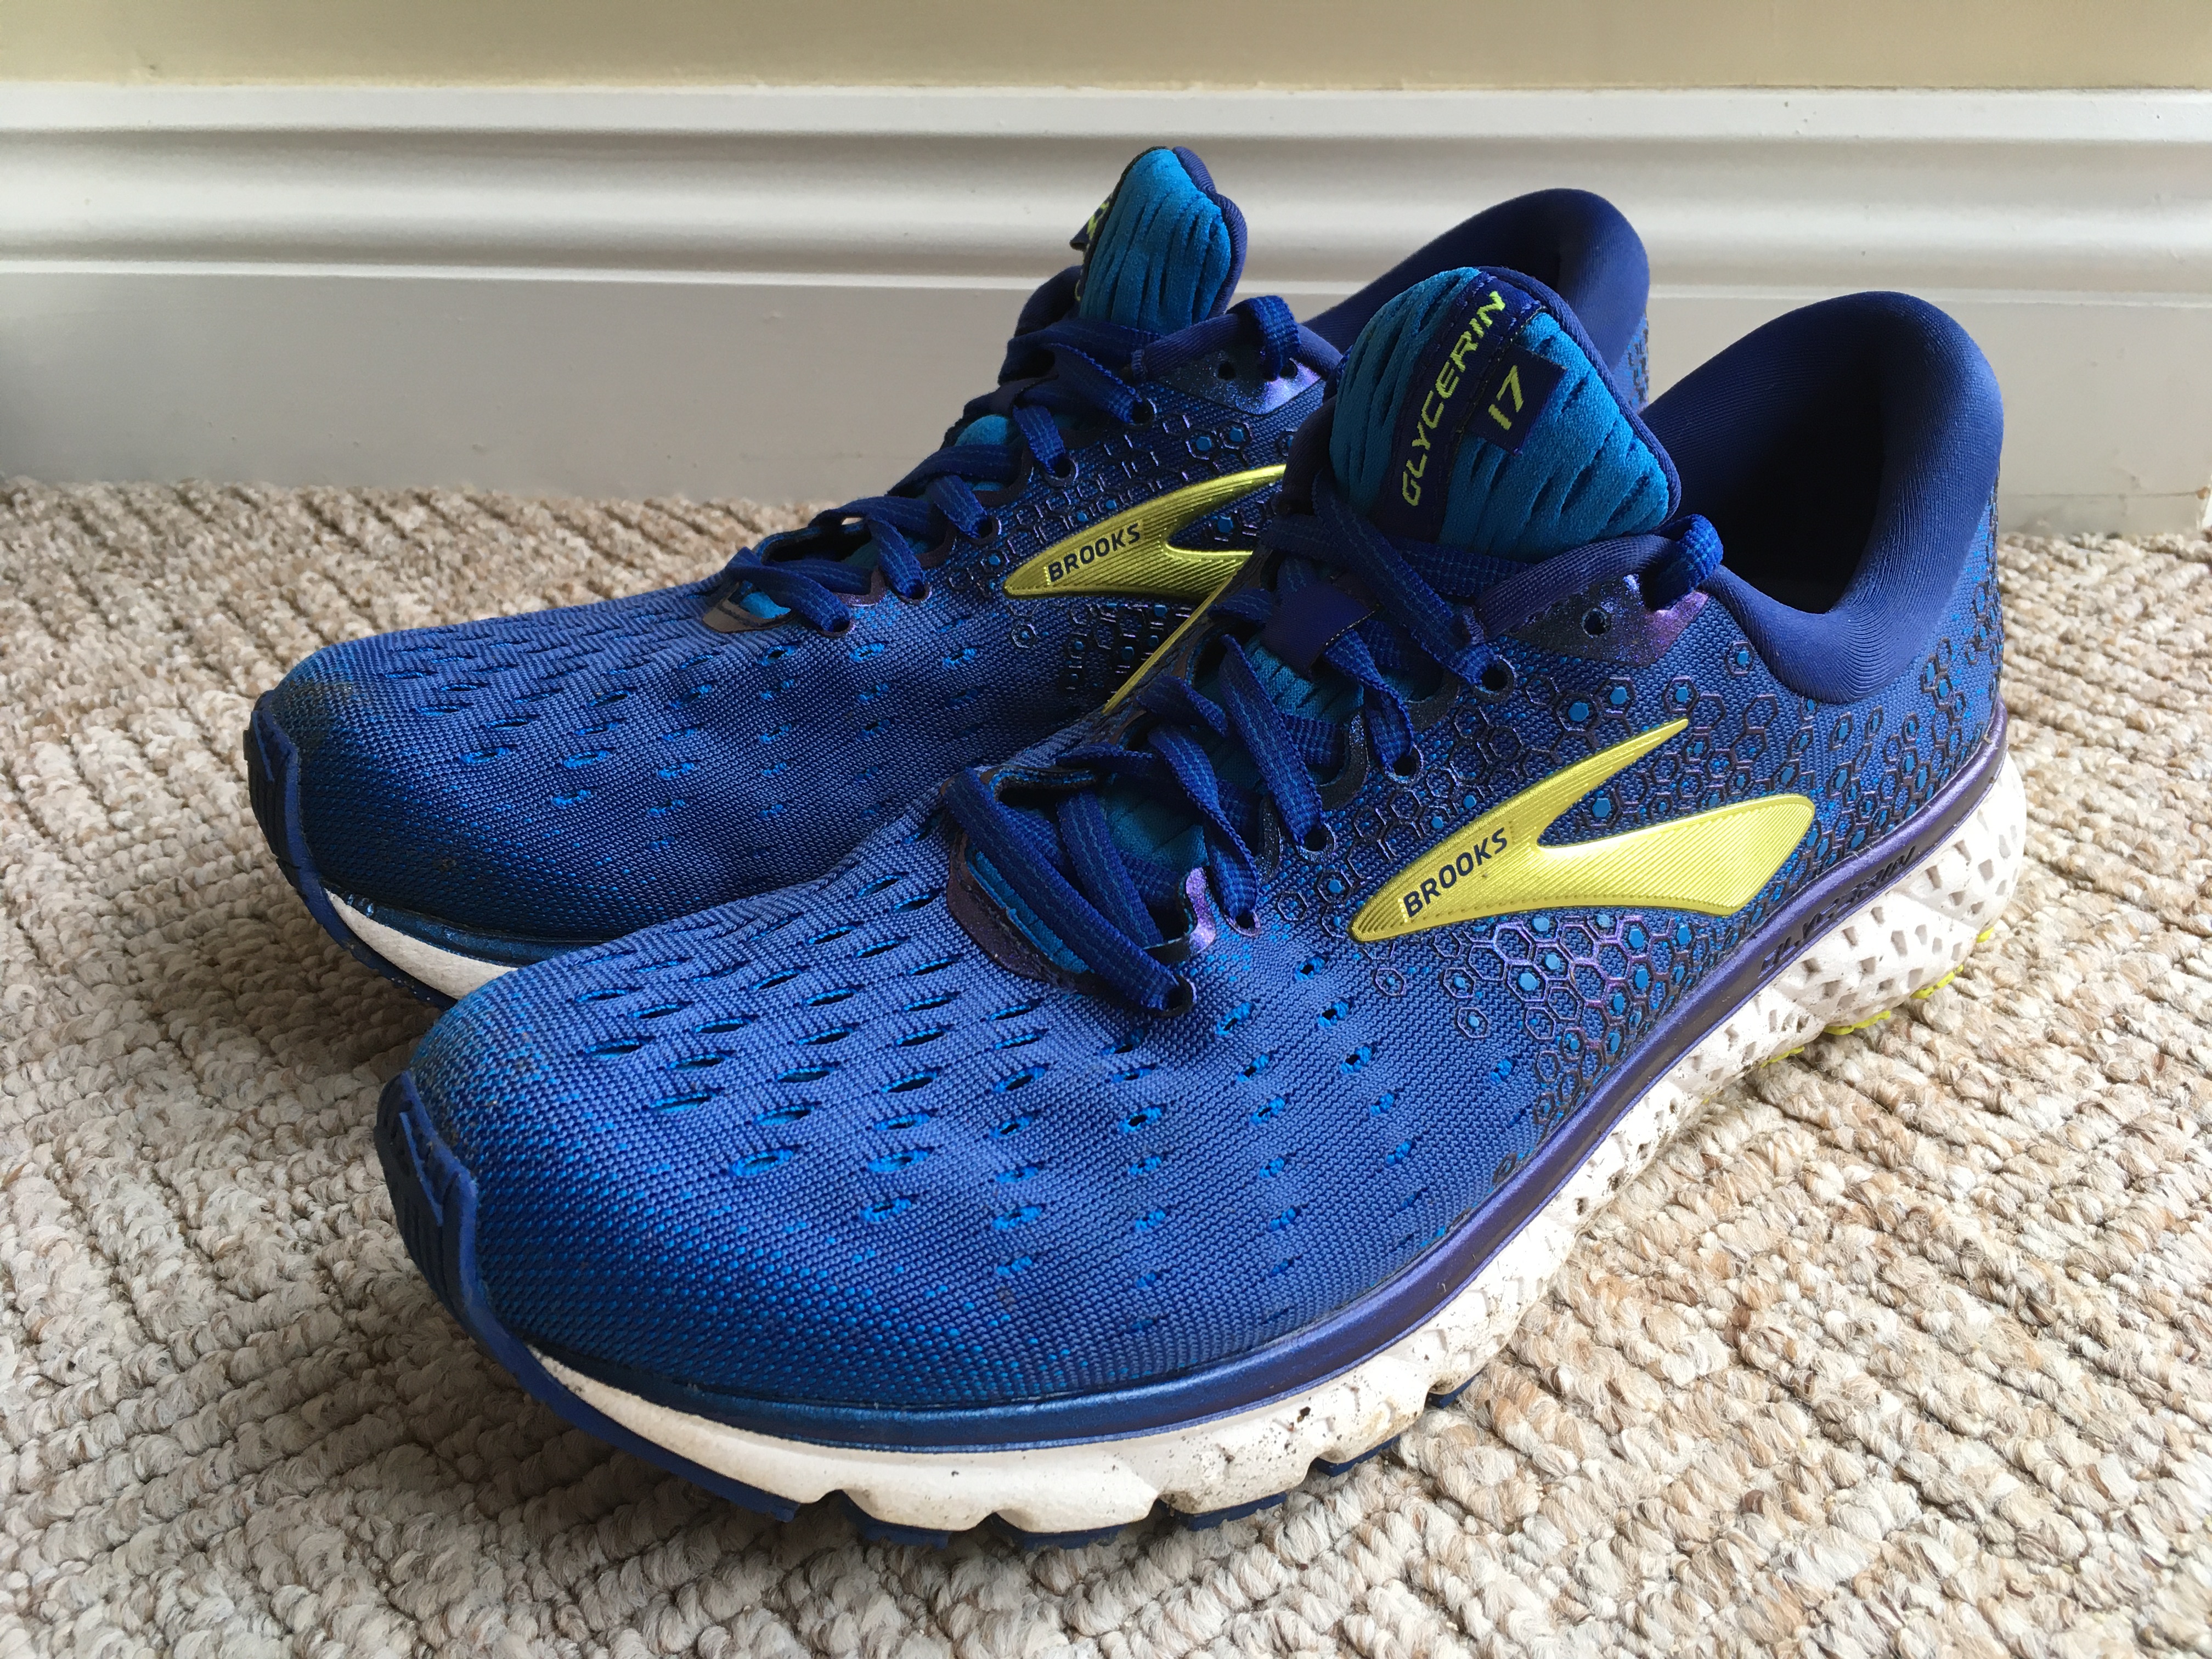 Brooks Glycerin 17 running shoes